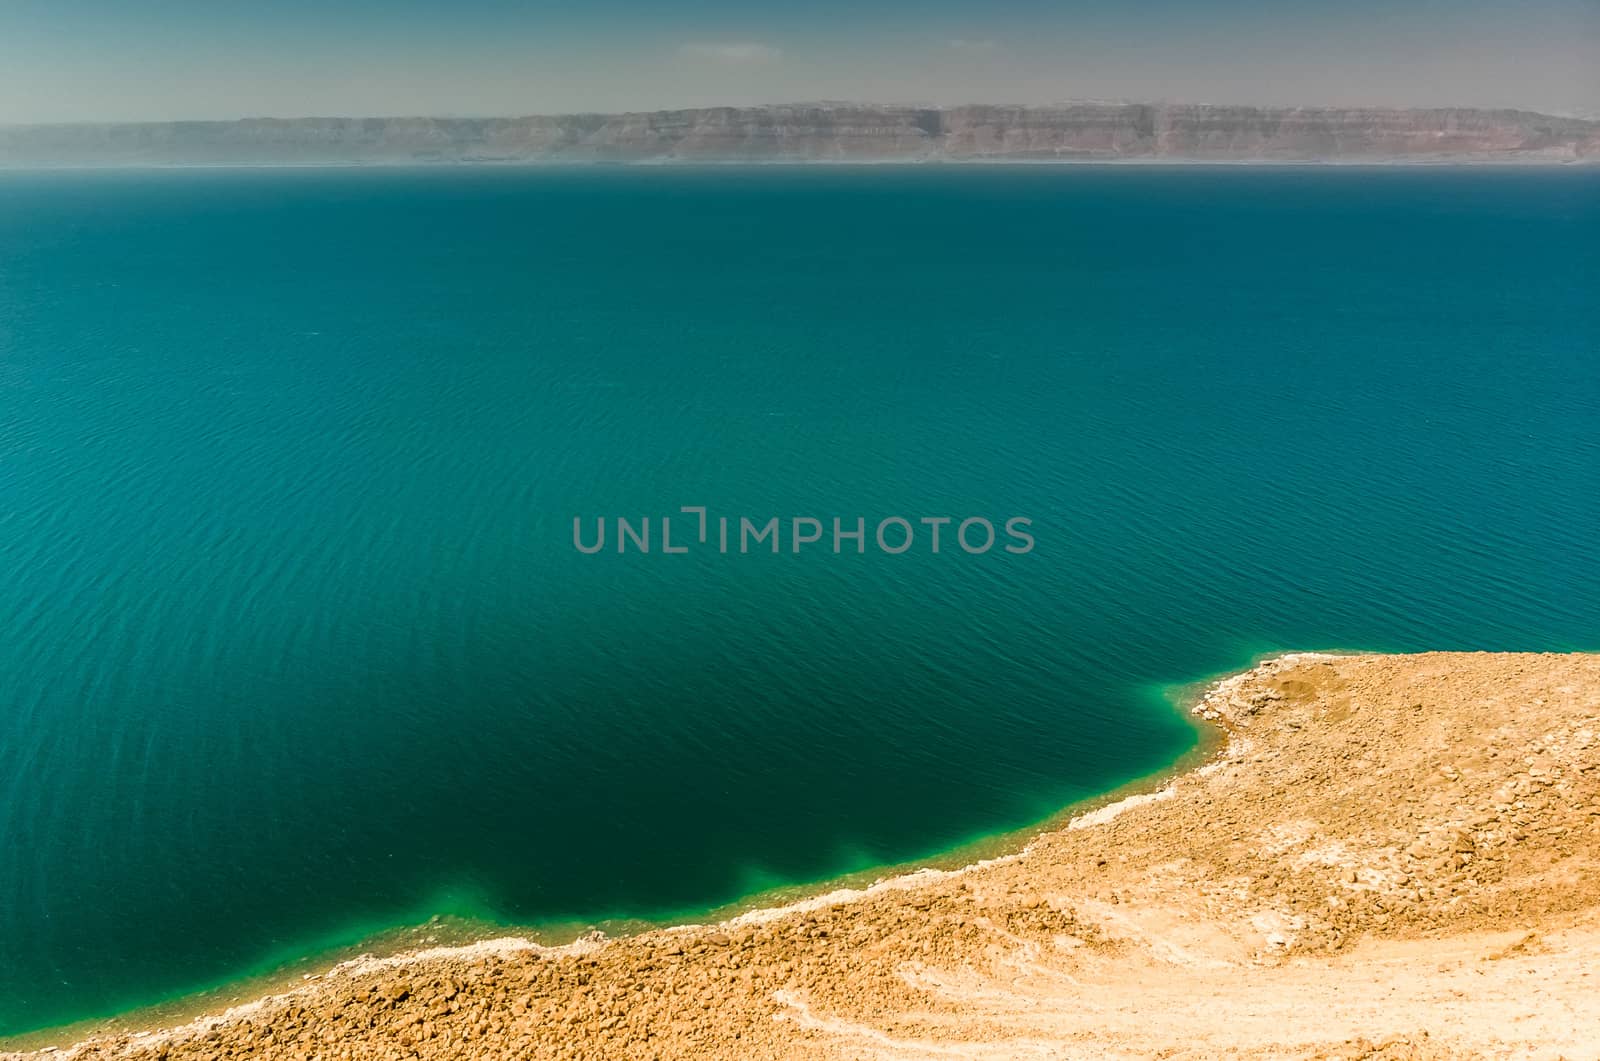 View from the Jordanian coast over the Dead Sea to the mountains on the west side in Israel by geogif